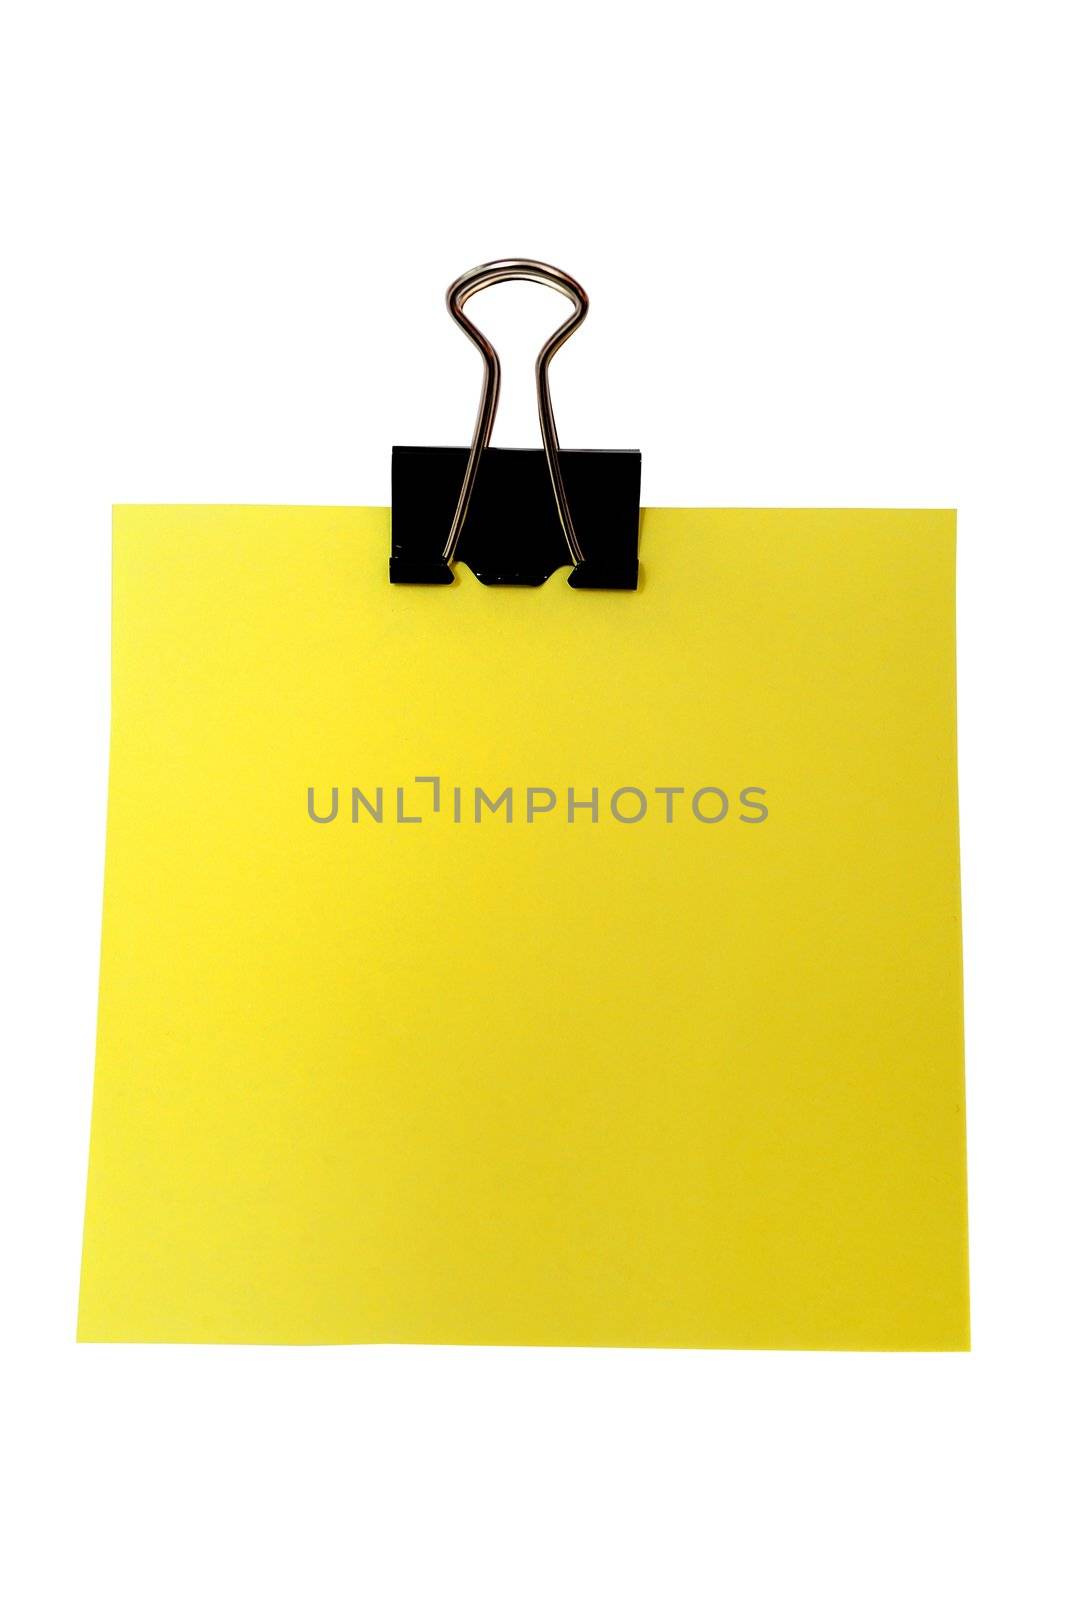 An image of yellow sticky note on white